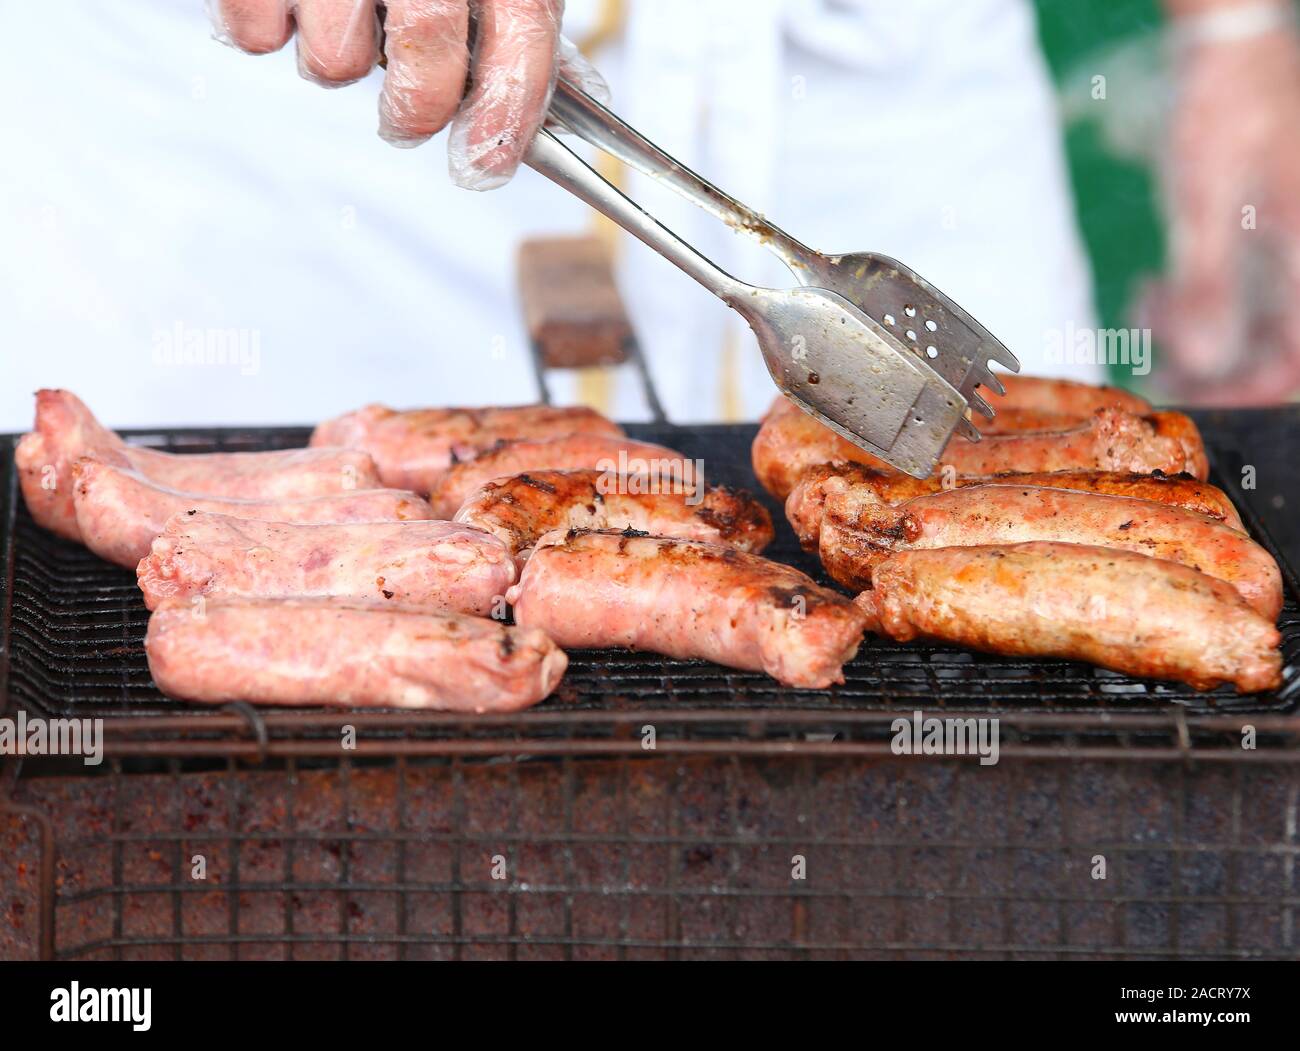 Sausage grilling on a barbecue grill. Stock Photo